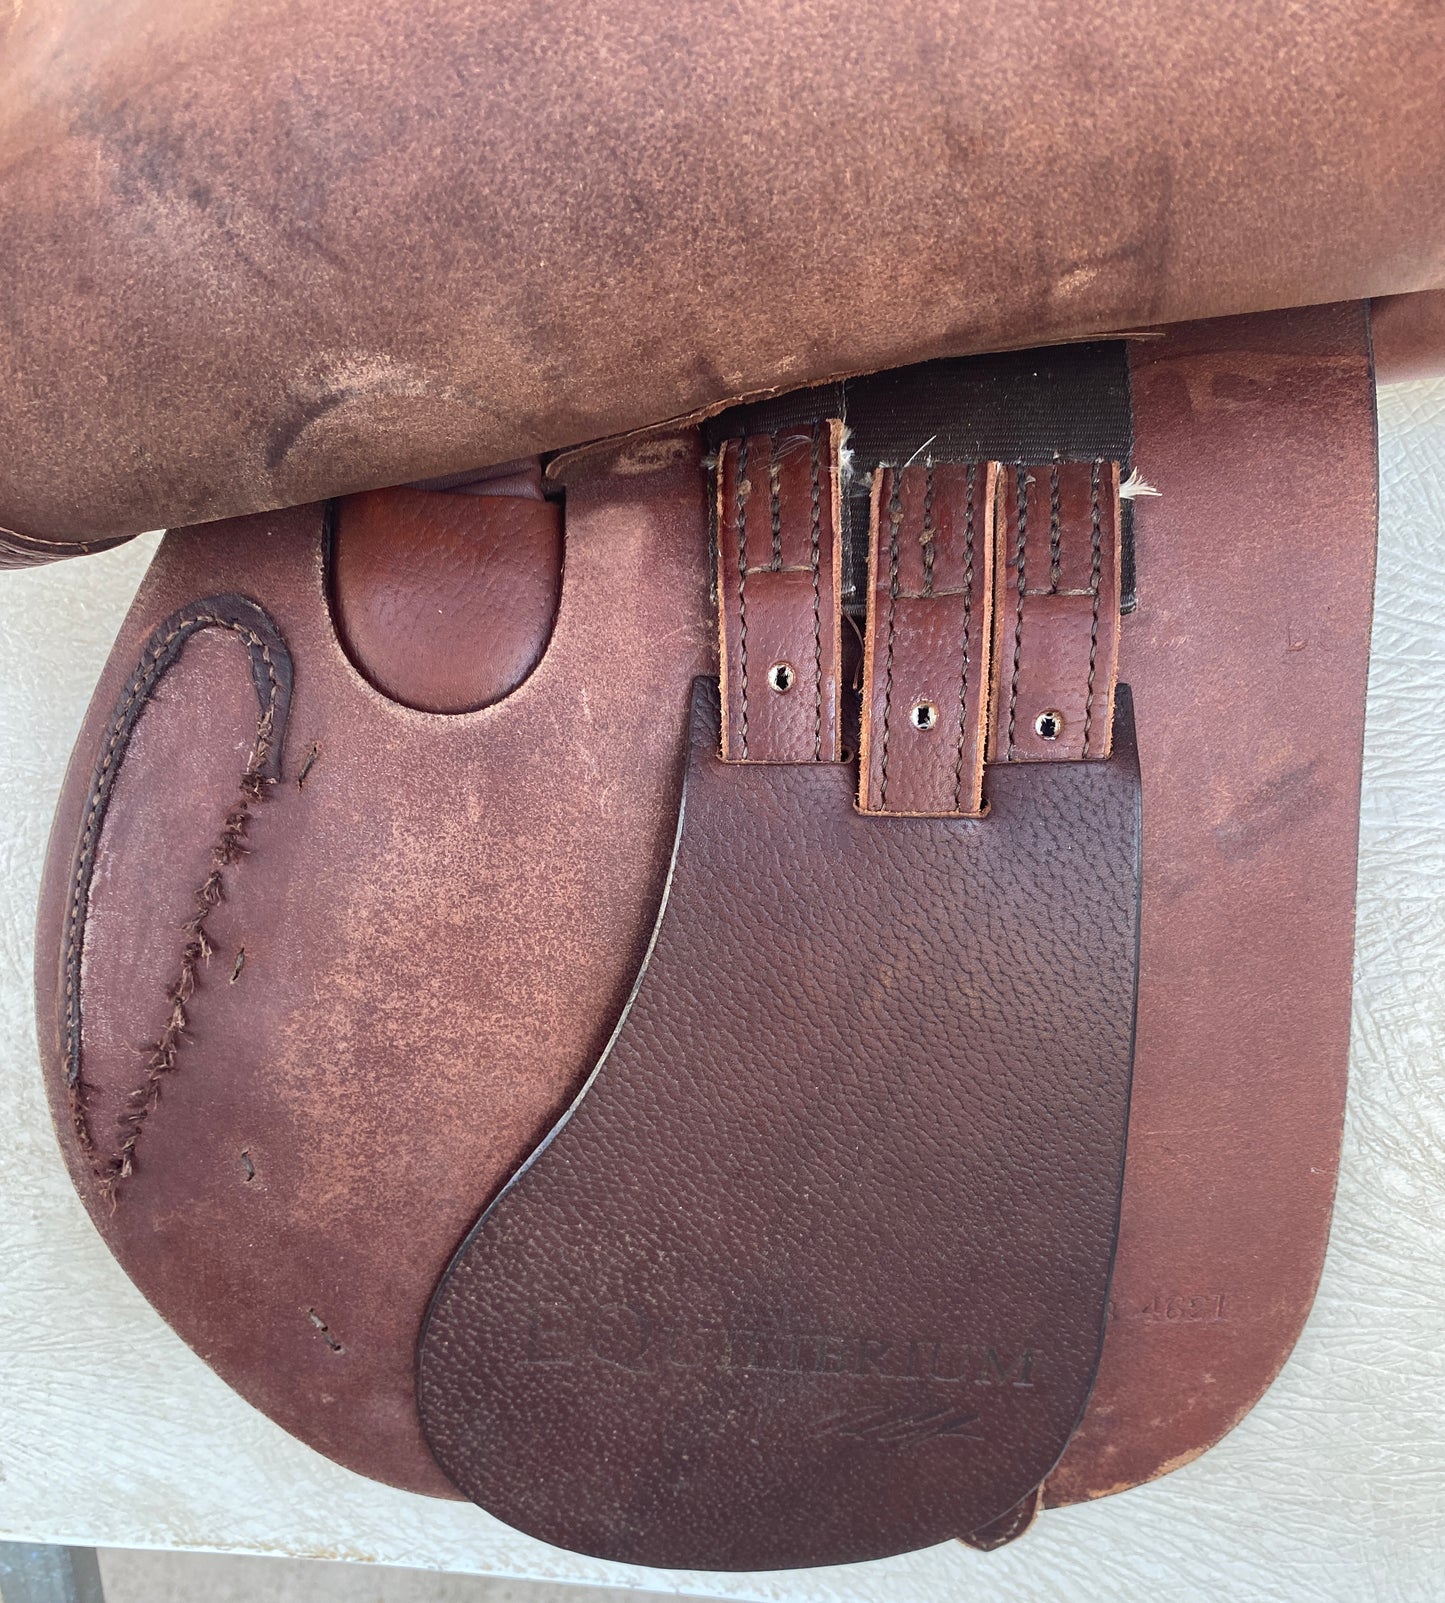 16” Wide Crosby Equilibrium Close Contact Saddle